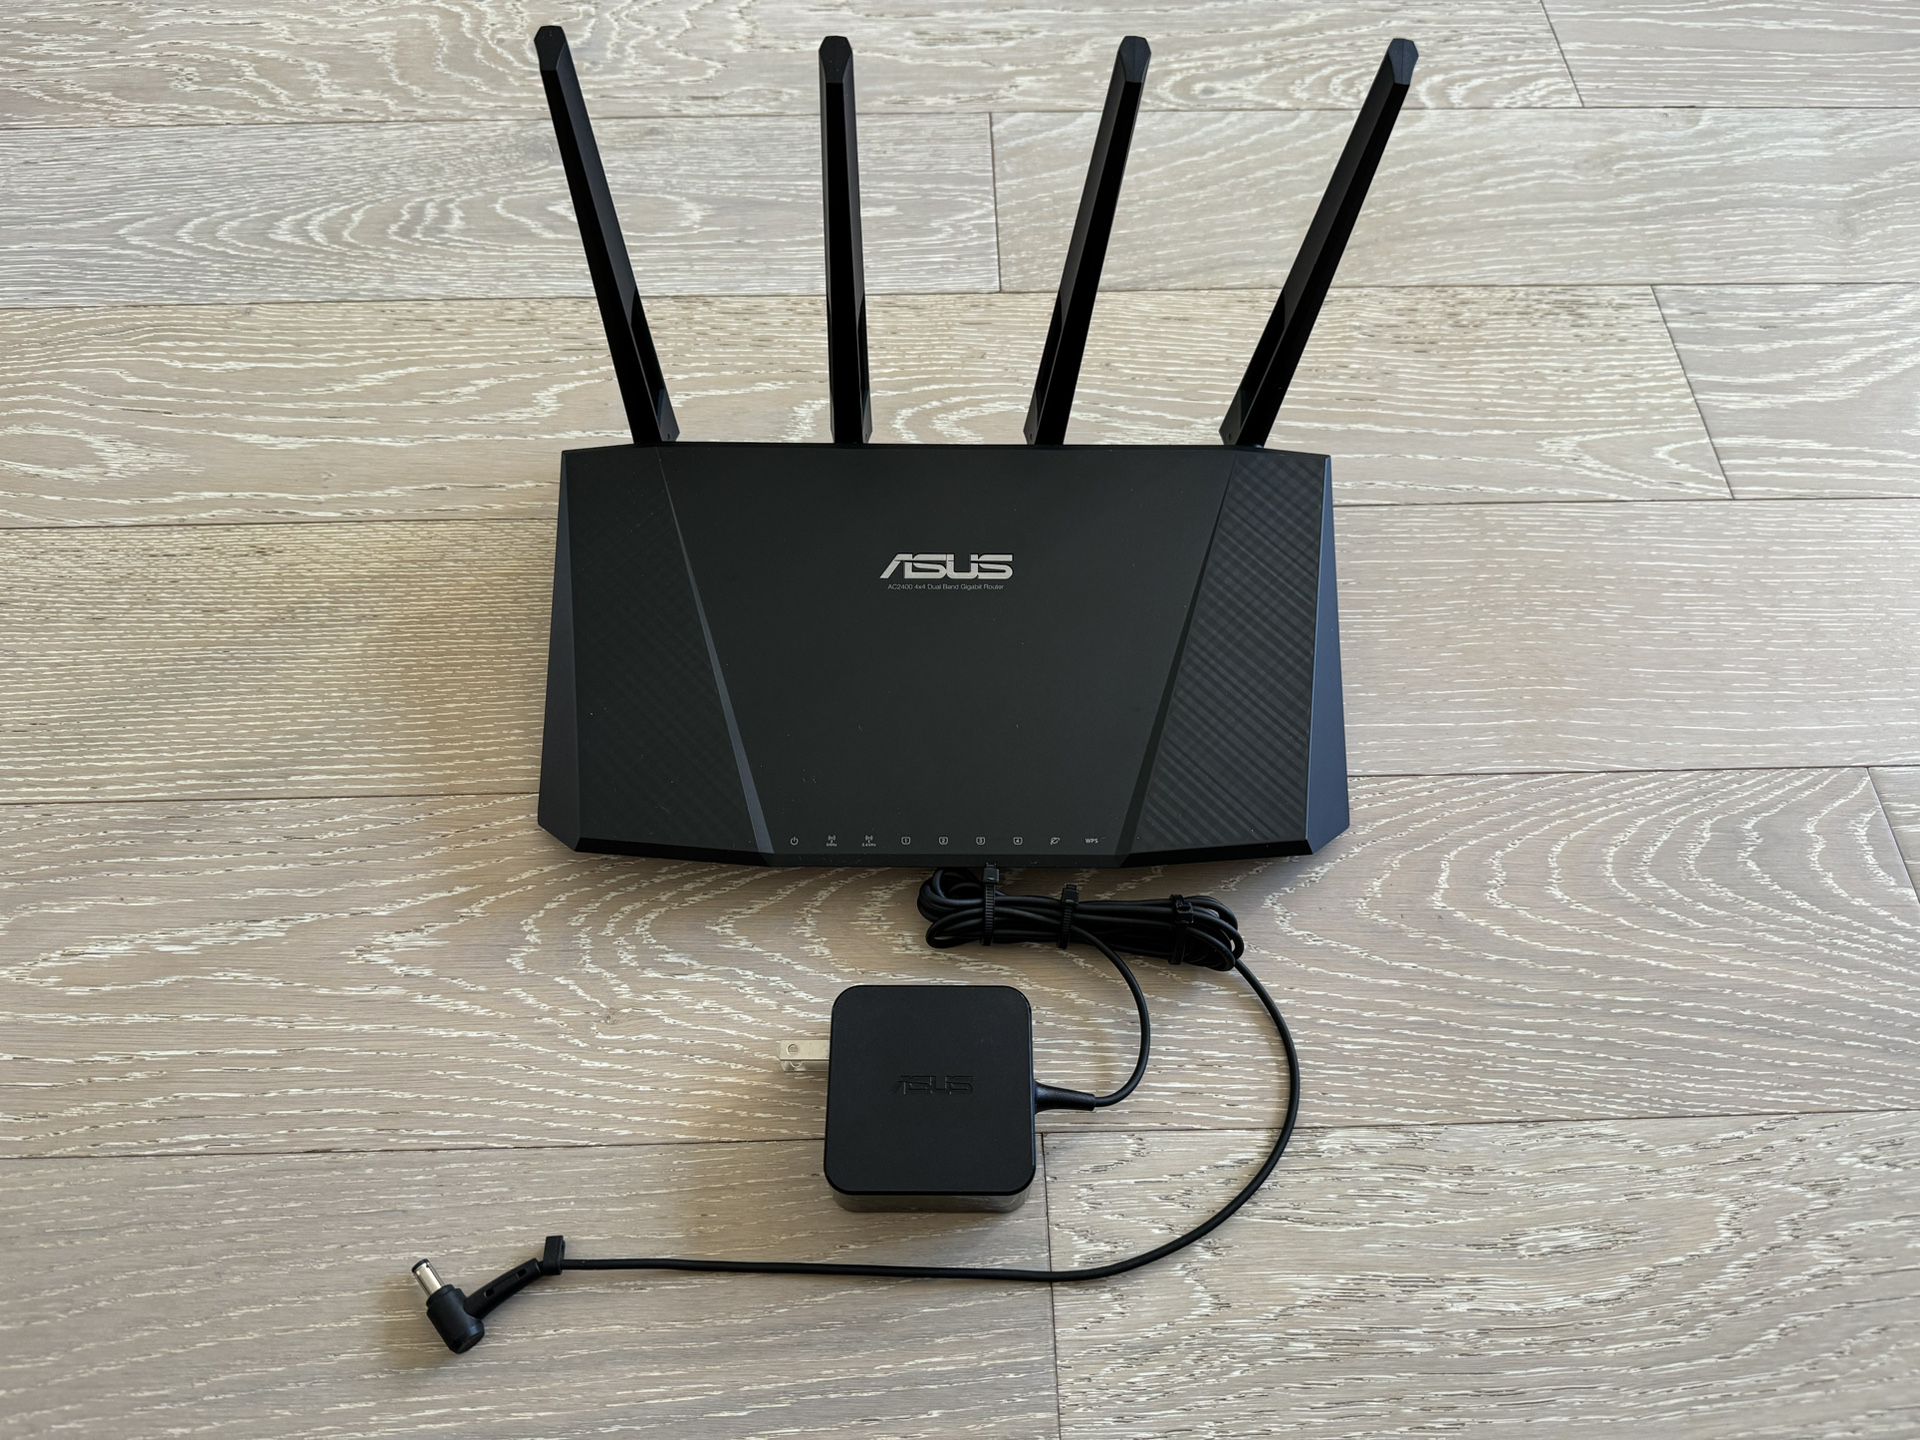 Asus AC2400 RT-AC87R Dual Band Wireless Gigabit Router Wi-Fi ASUS 4x4 Dual Band